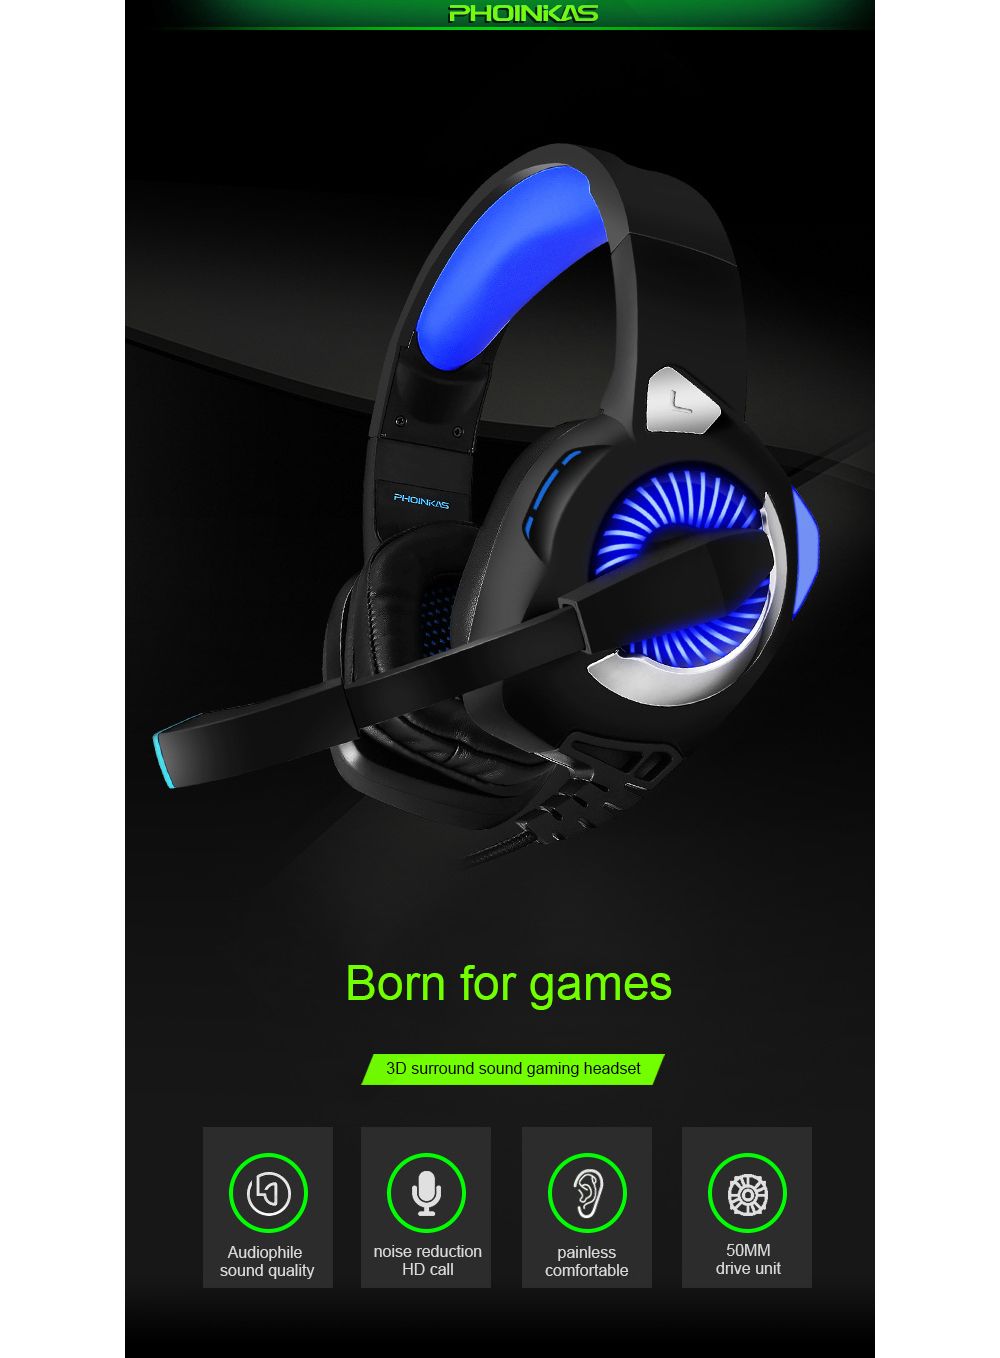 PHOINIKAS-H-9-Gaming-Headset-50mm-Drive-Unit-120deg-Rotating-Microphone-Noise-Reduction-Protein-Leat-1755235